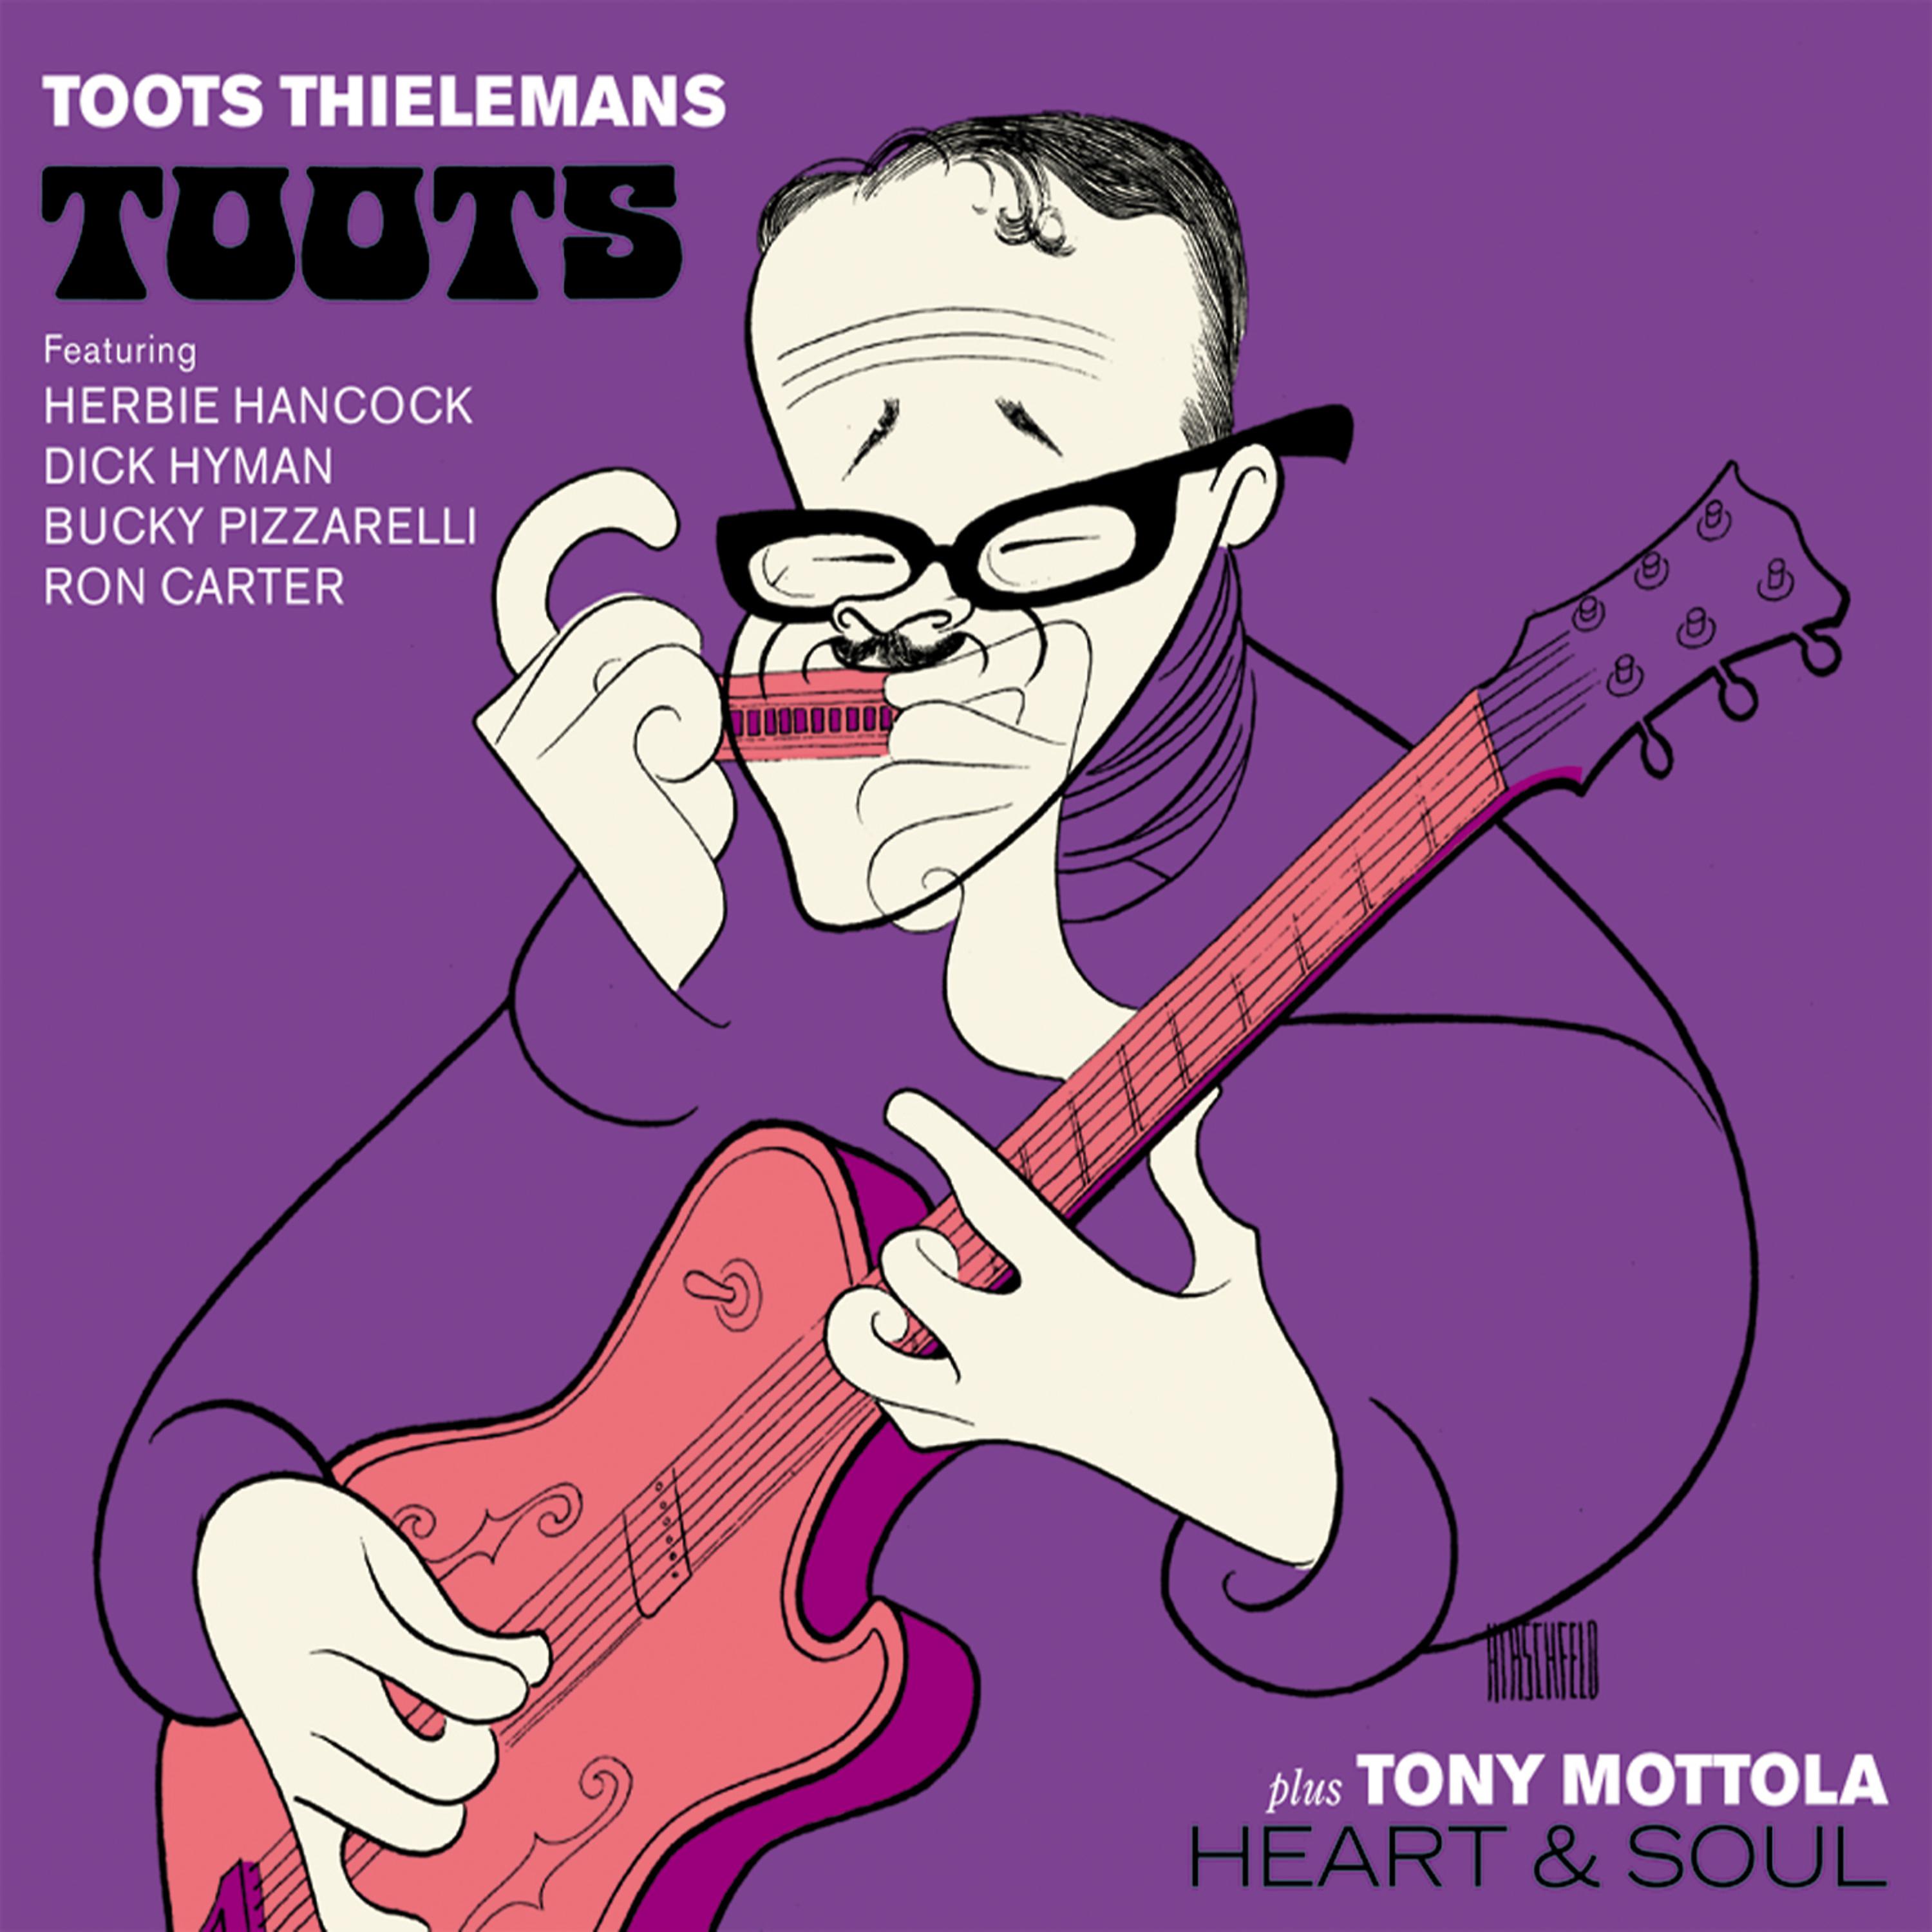 Постер альбома Toots Thielemans 'Toots'. Tony Mottola 'Heart and Soul'